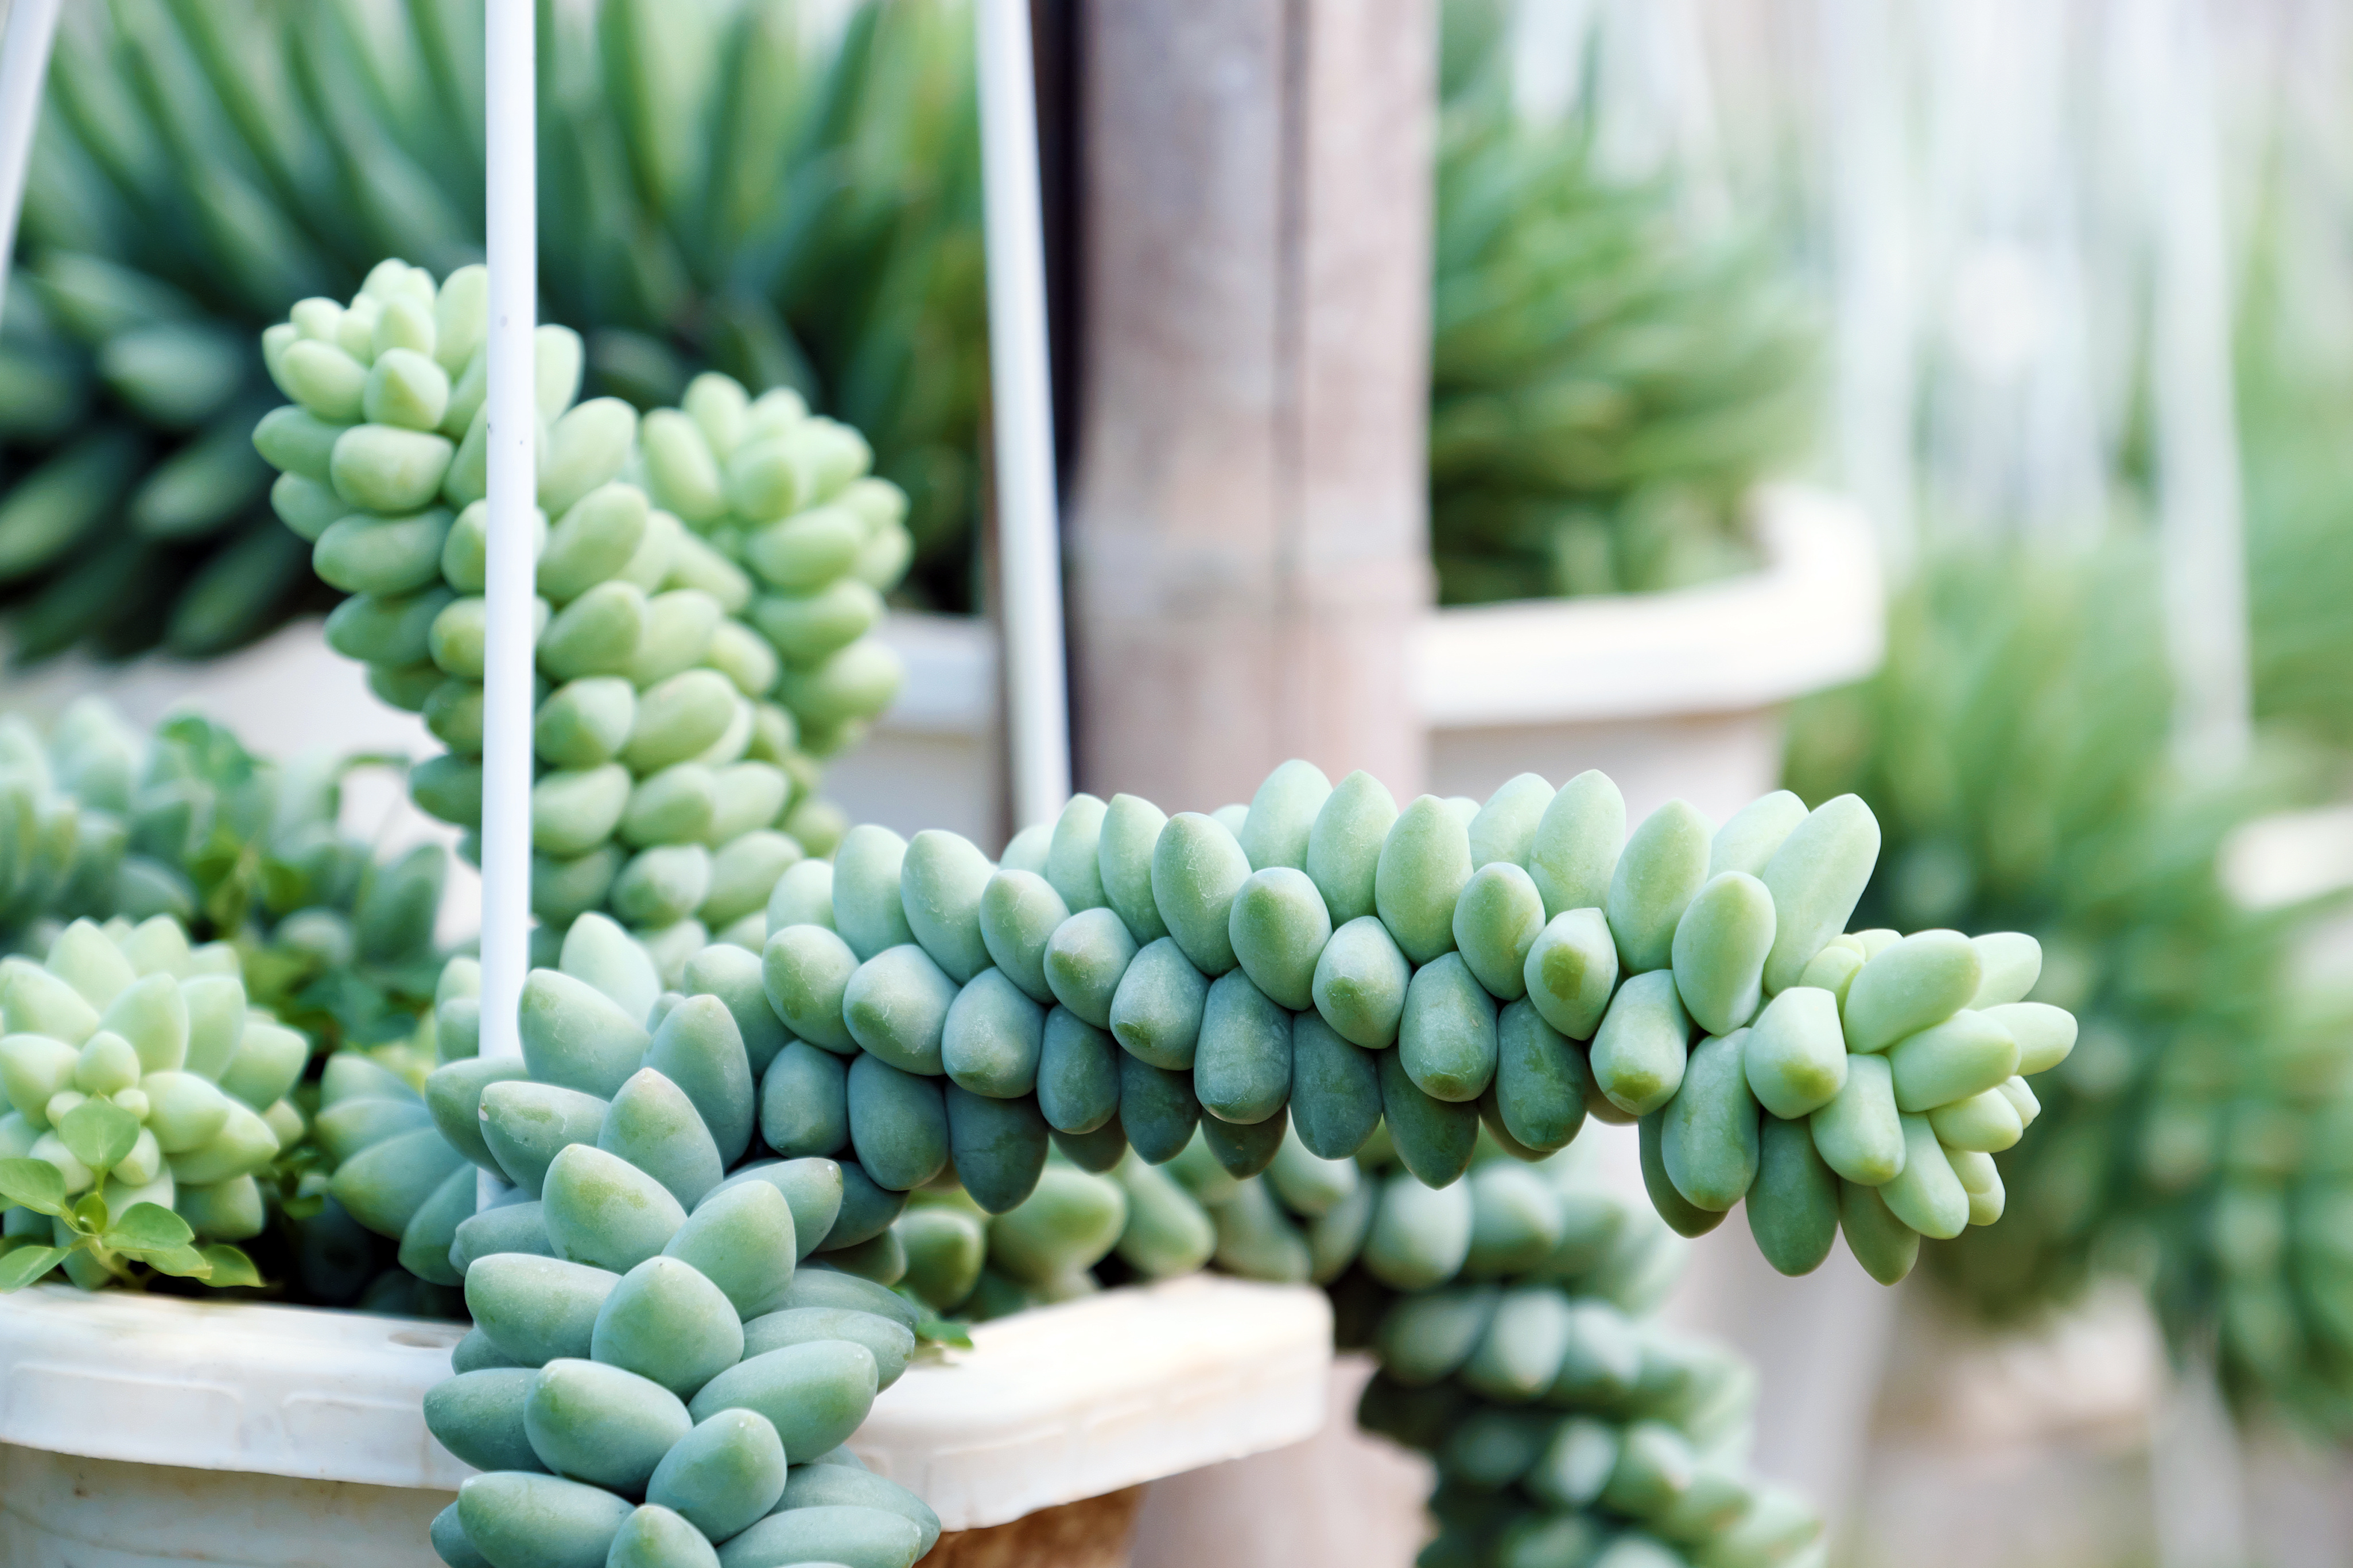 Group of Sedum burro tail hang on frame in flower garden, close up of succulent cacti with green background, a kind of houseplant so beautiful